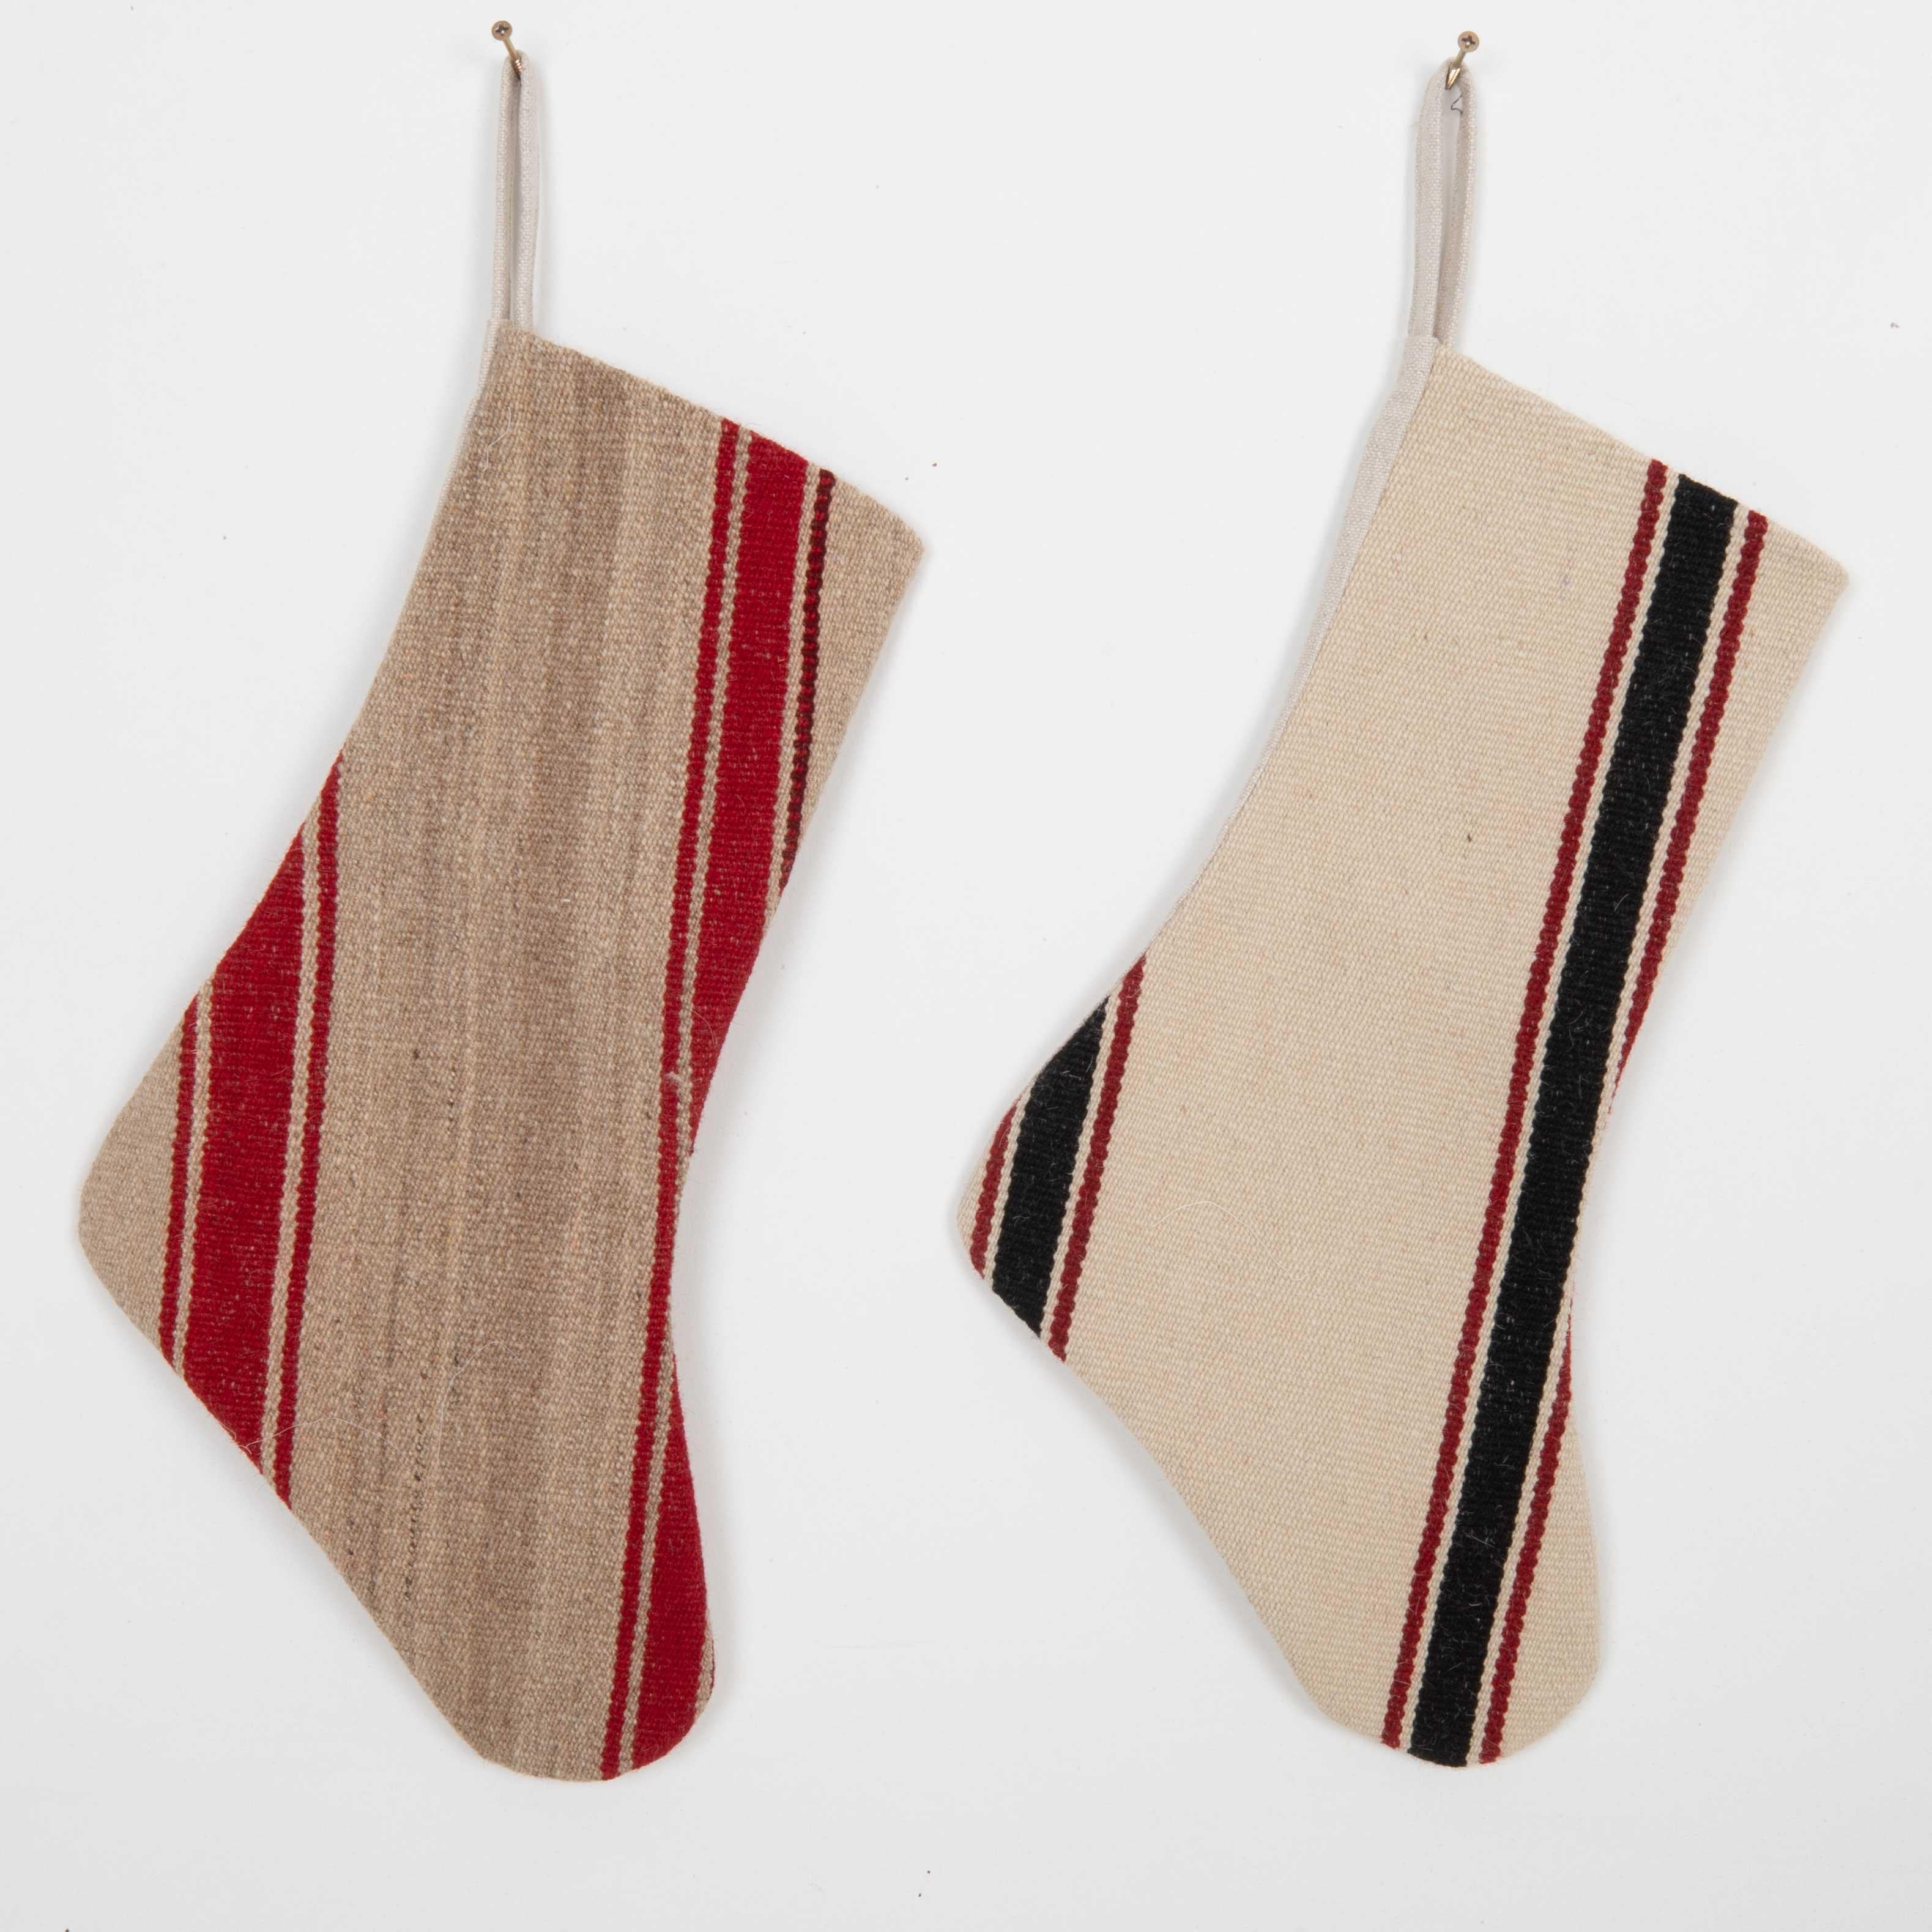 These Christmas Stockings were made from mid 20th C. Anatolian Kilim Fragments.


Please note, this stocking was made from kilim fragments.
